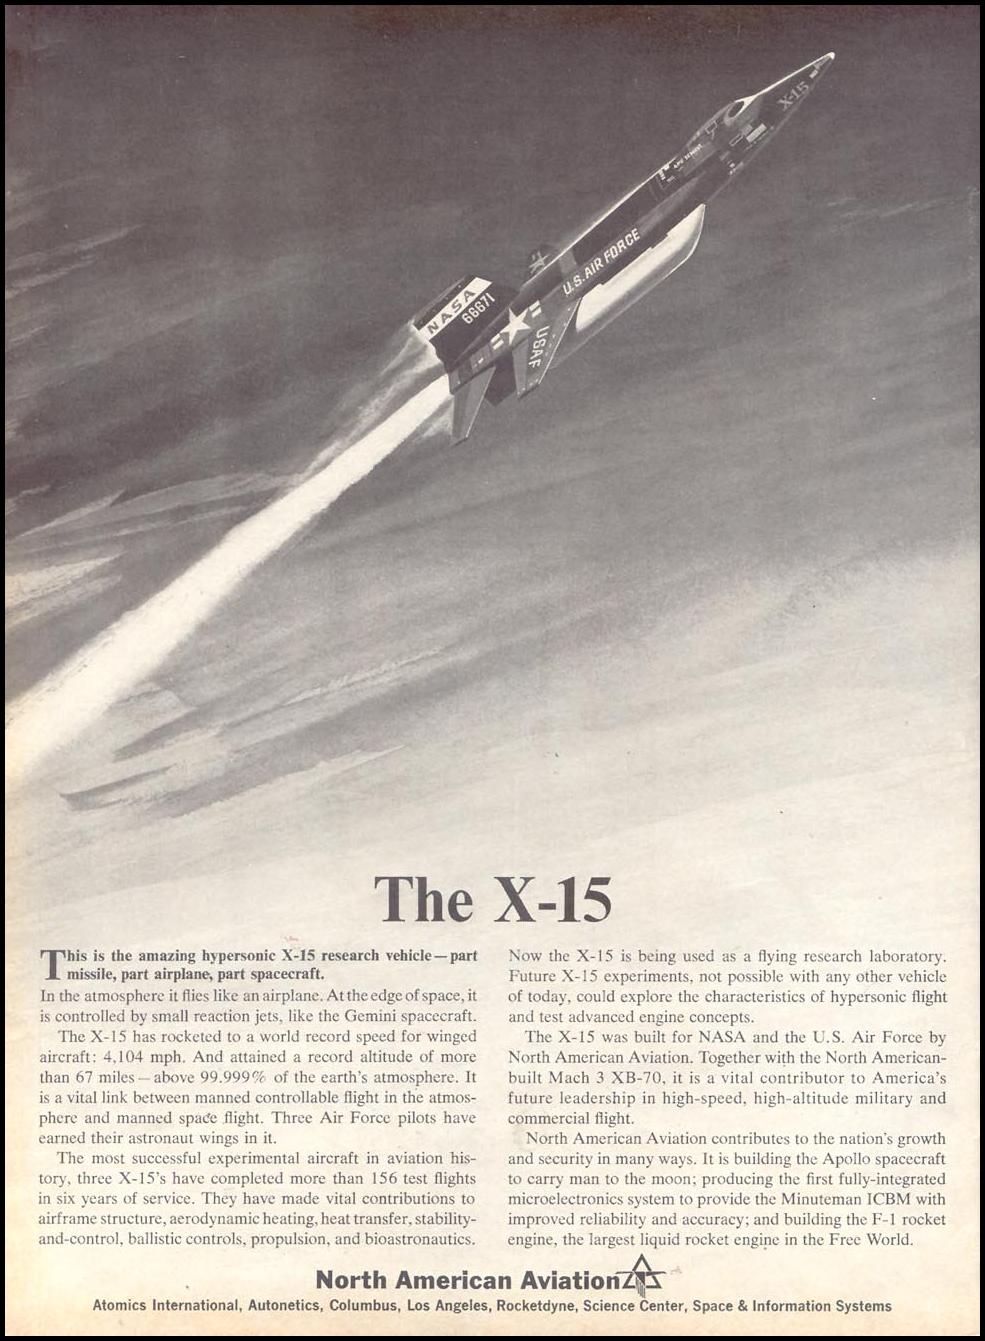 X-15 RESEARCH VEHICLE
TIME
03/11/1966
p. 86